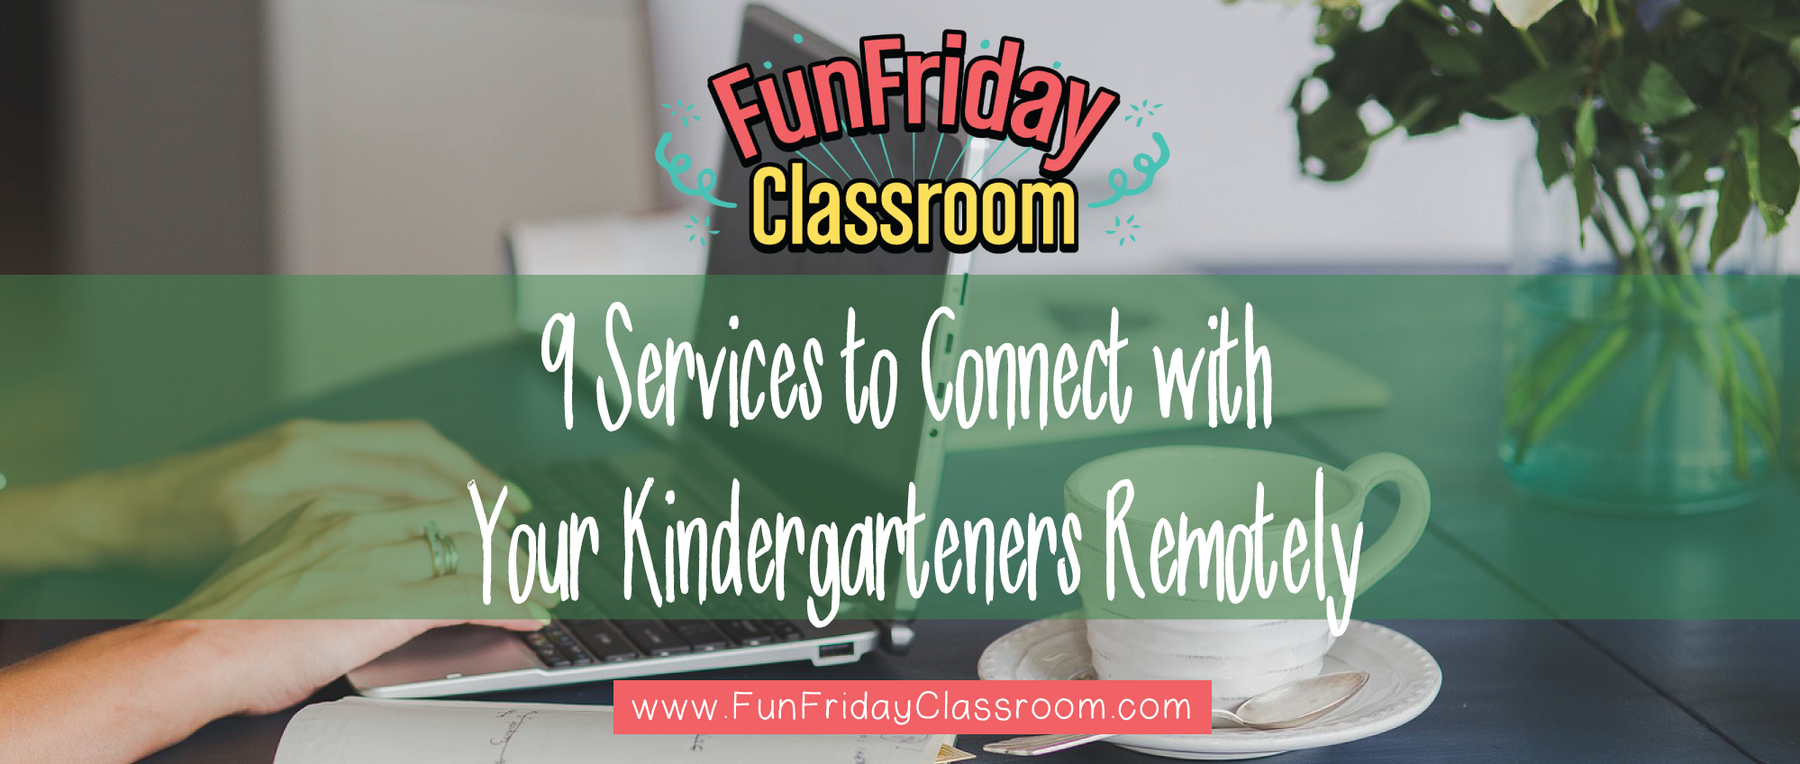 9 Services to Connect with Your Kindergarteners Remotely